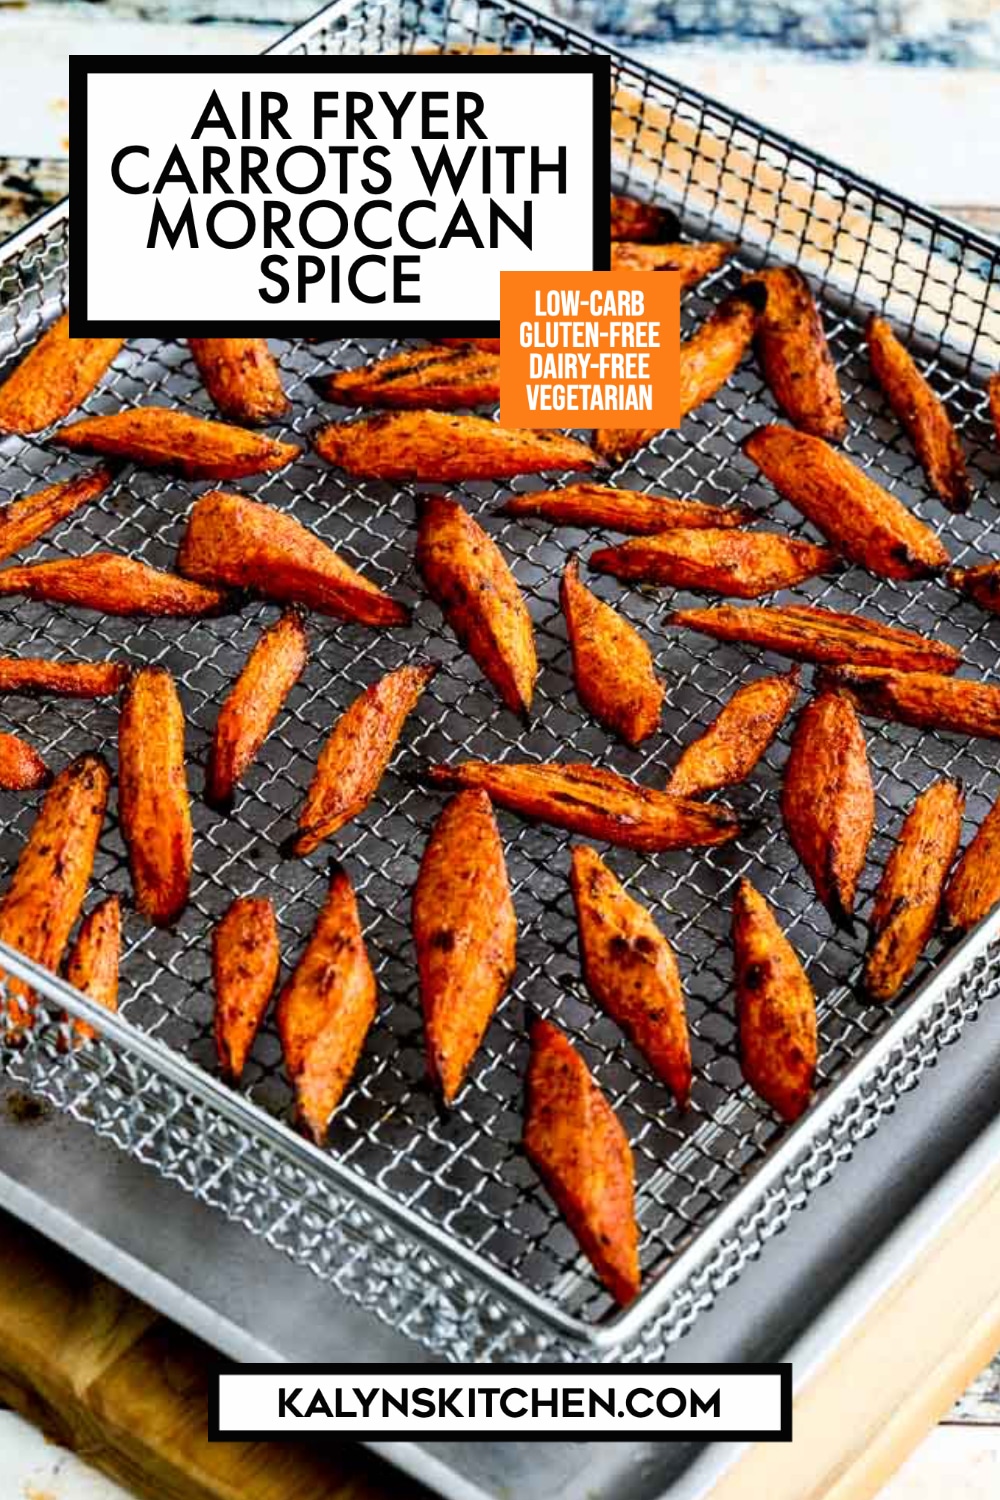 Pinterest image of Air Fryer Carrots with Moroccan Spice